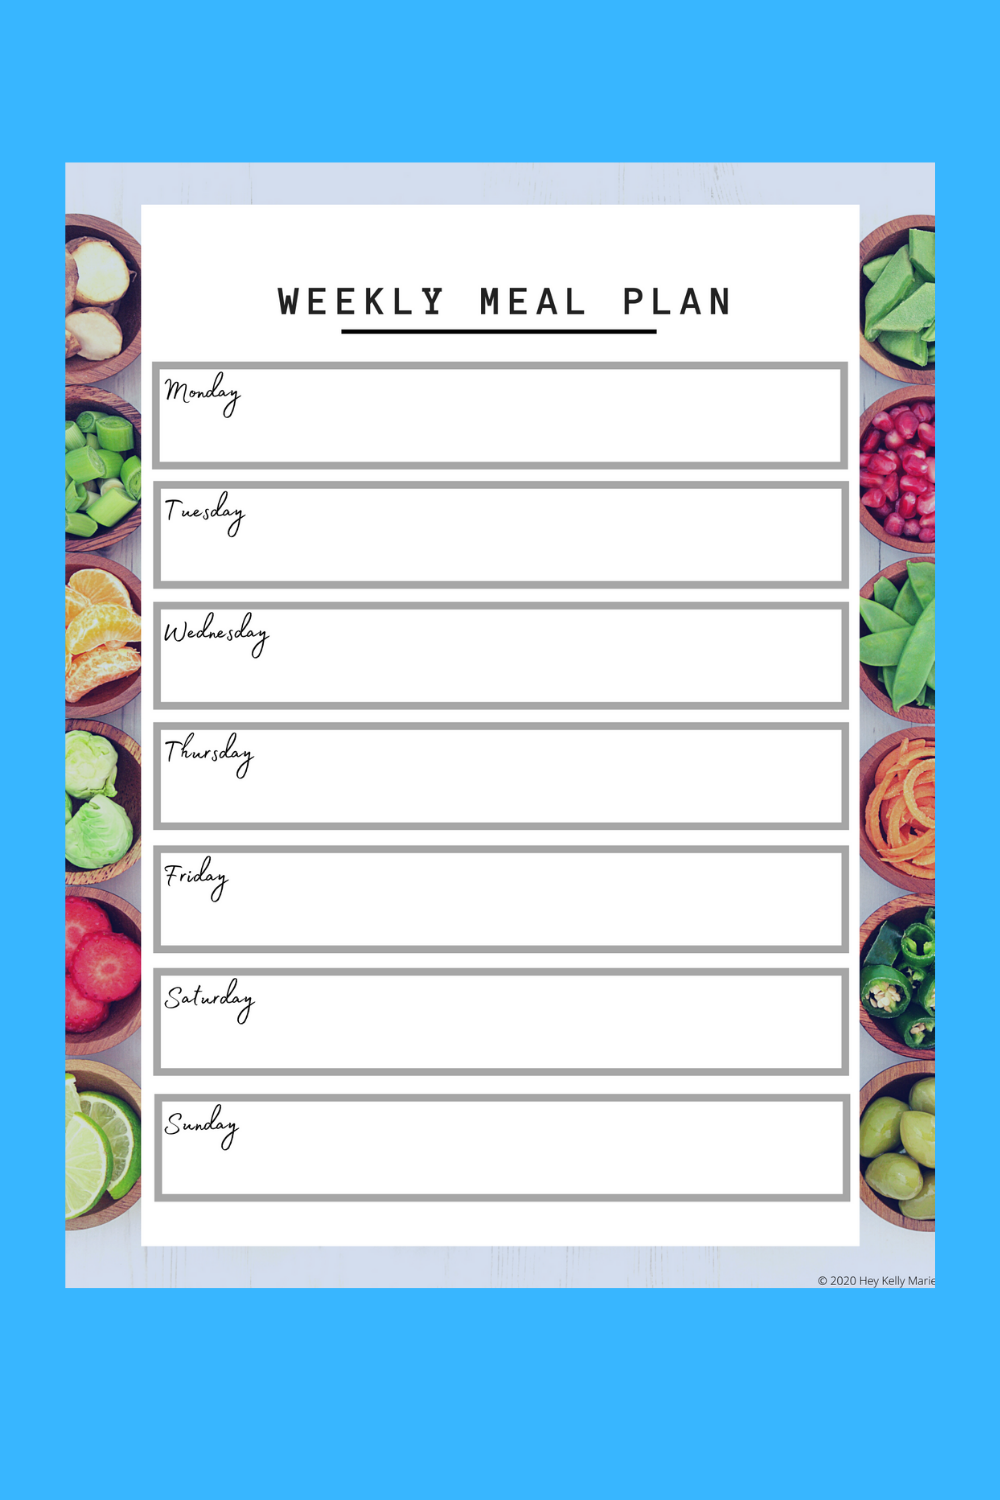 Printable Meal Planner and Grocery List - Hey Kelly Marie